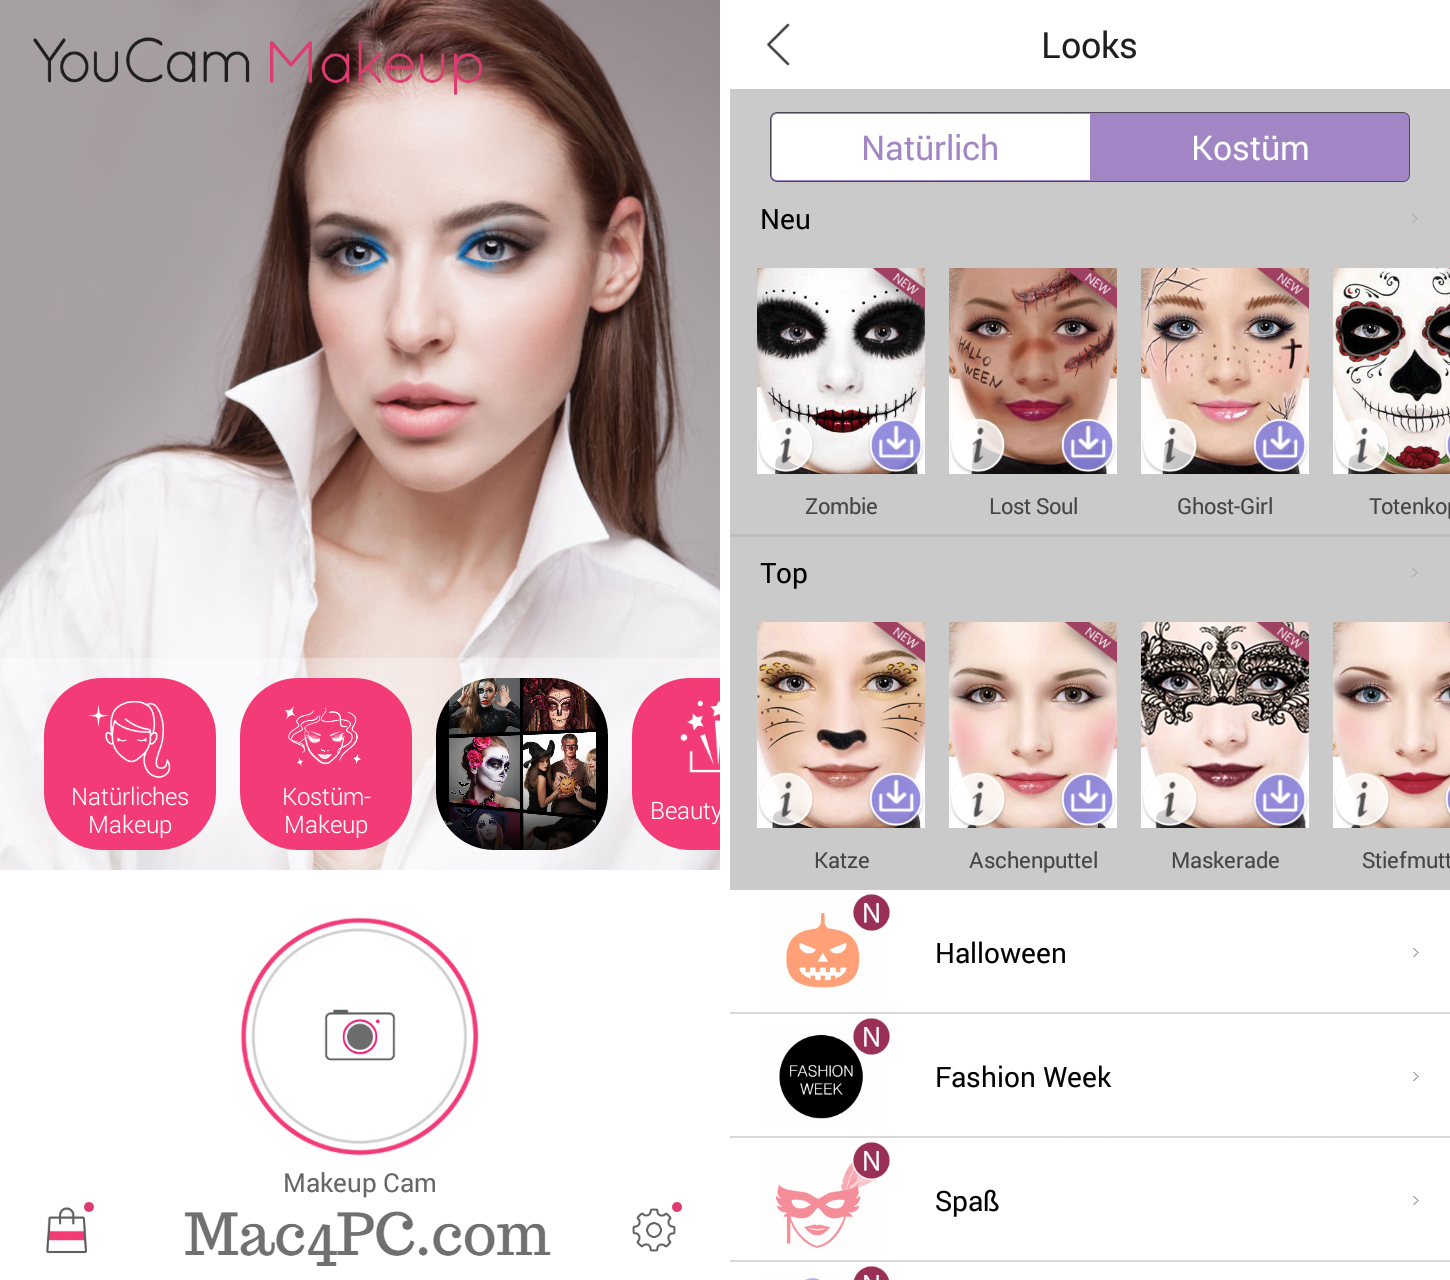 YouCam Makeup Pro 5.89.1 Cracked For Mac With MOD APK Free Download